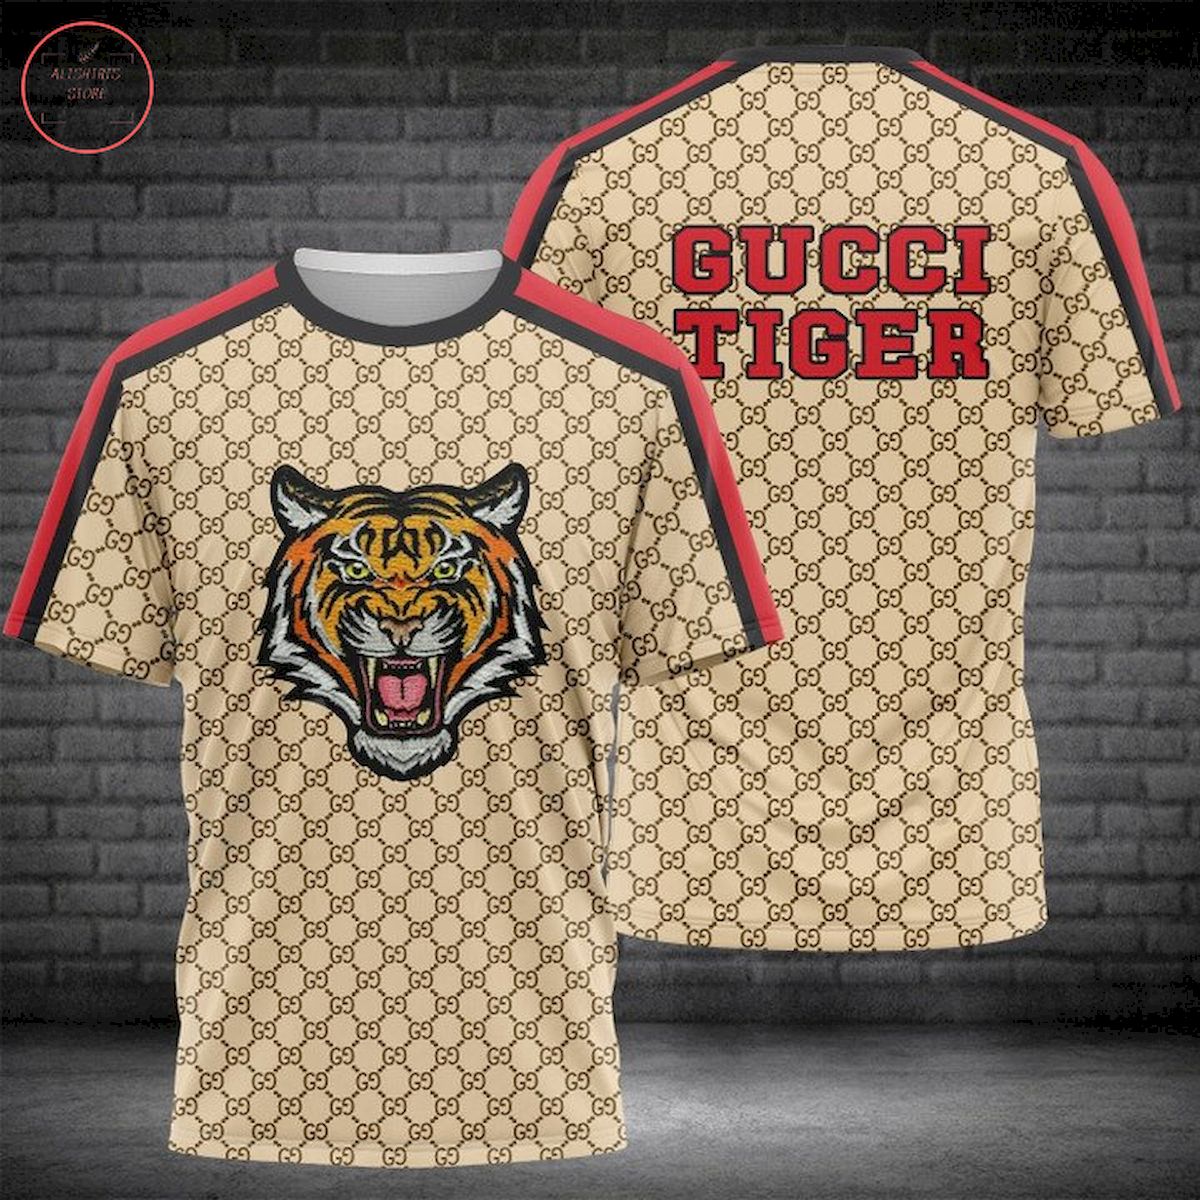 Gucci Tiger Italy Luxury Brand All Over Printed Shirt